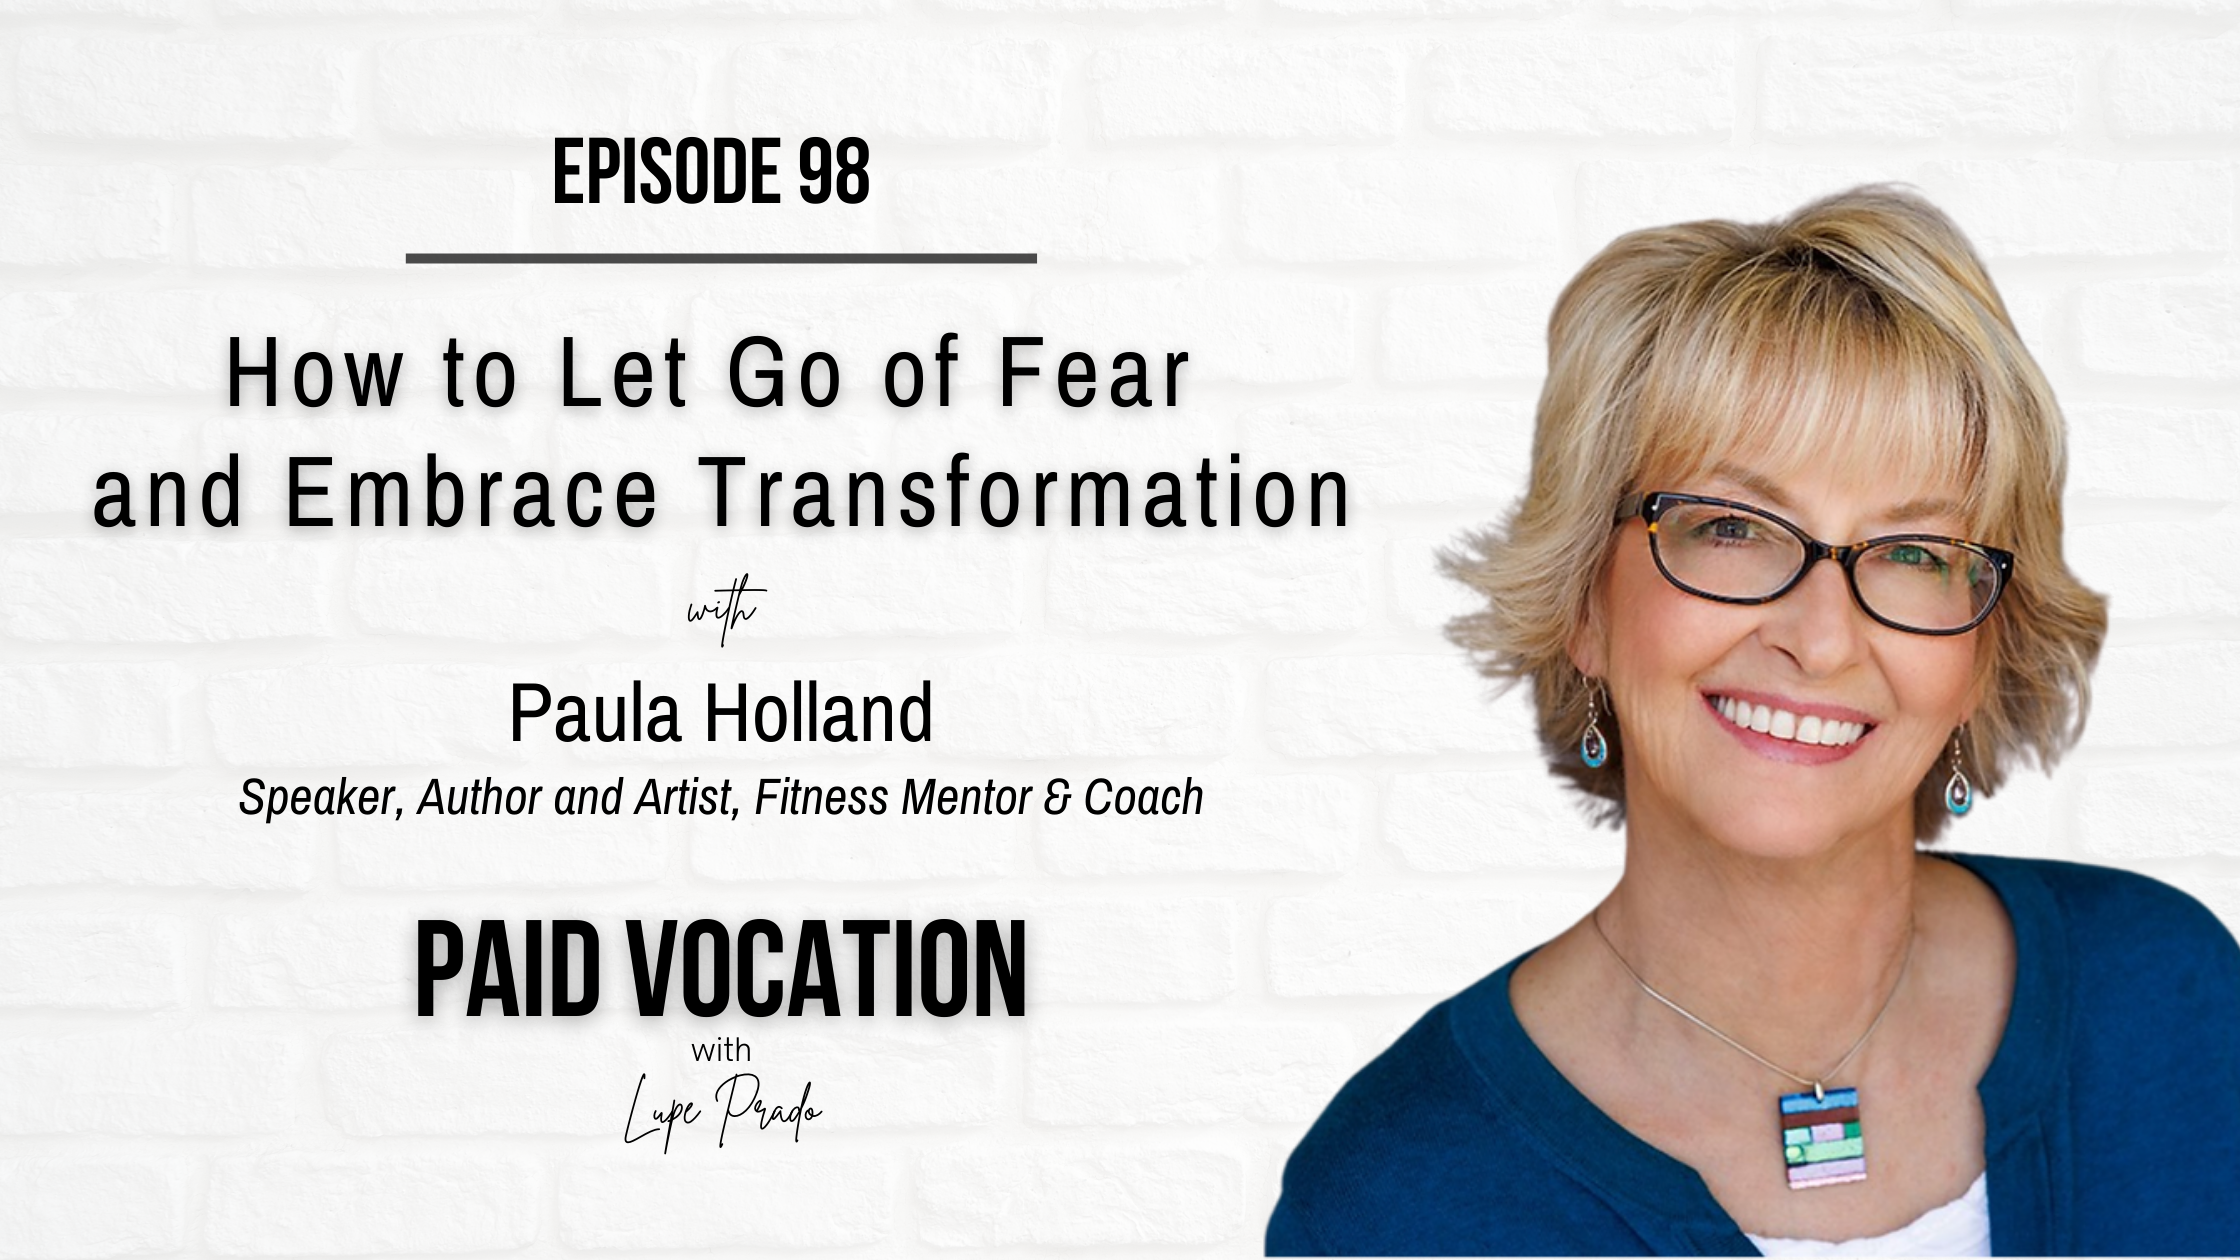 How to Let Go of Fear and Embrace Transformation with Paula Holland